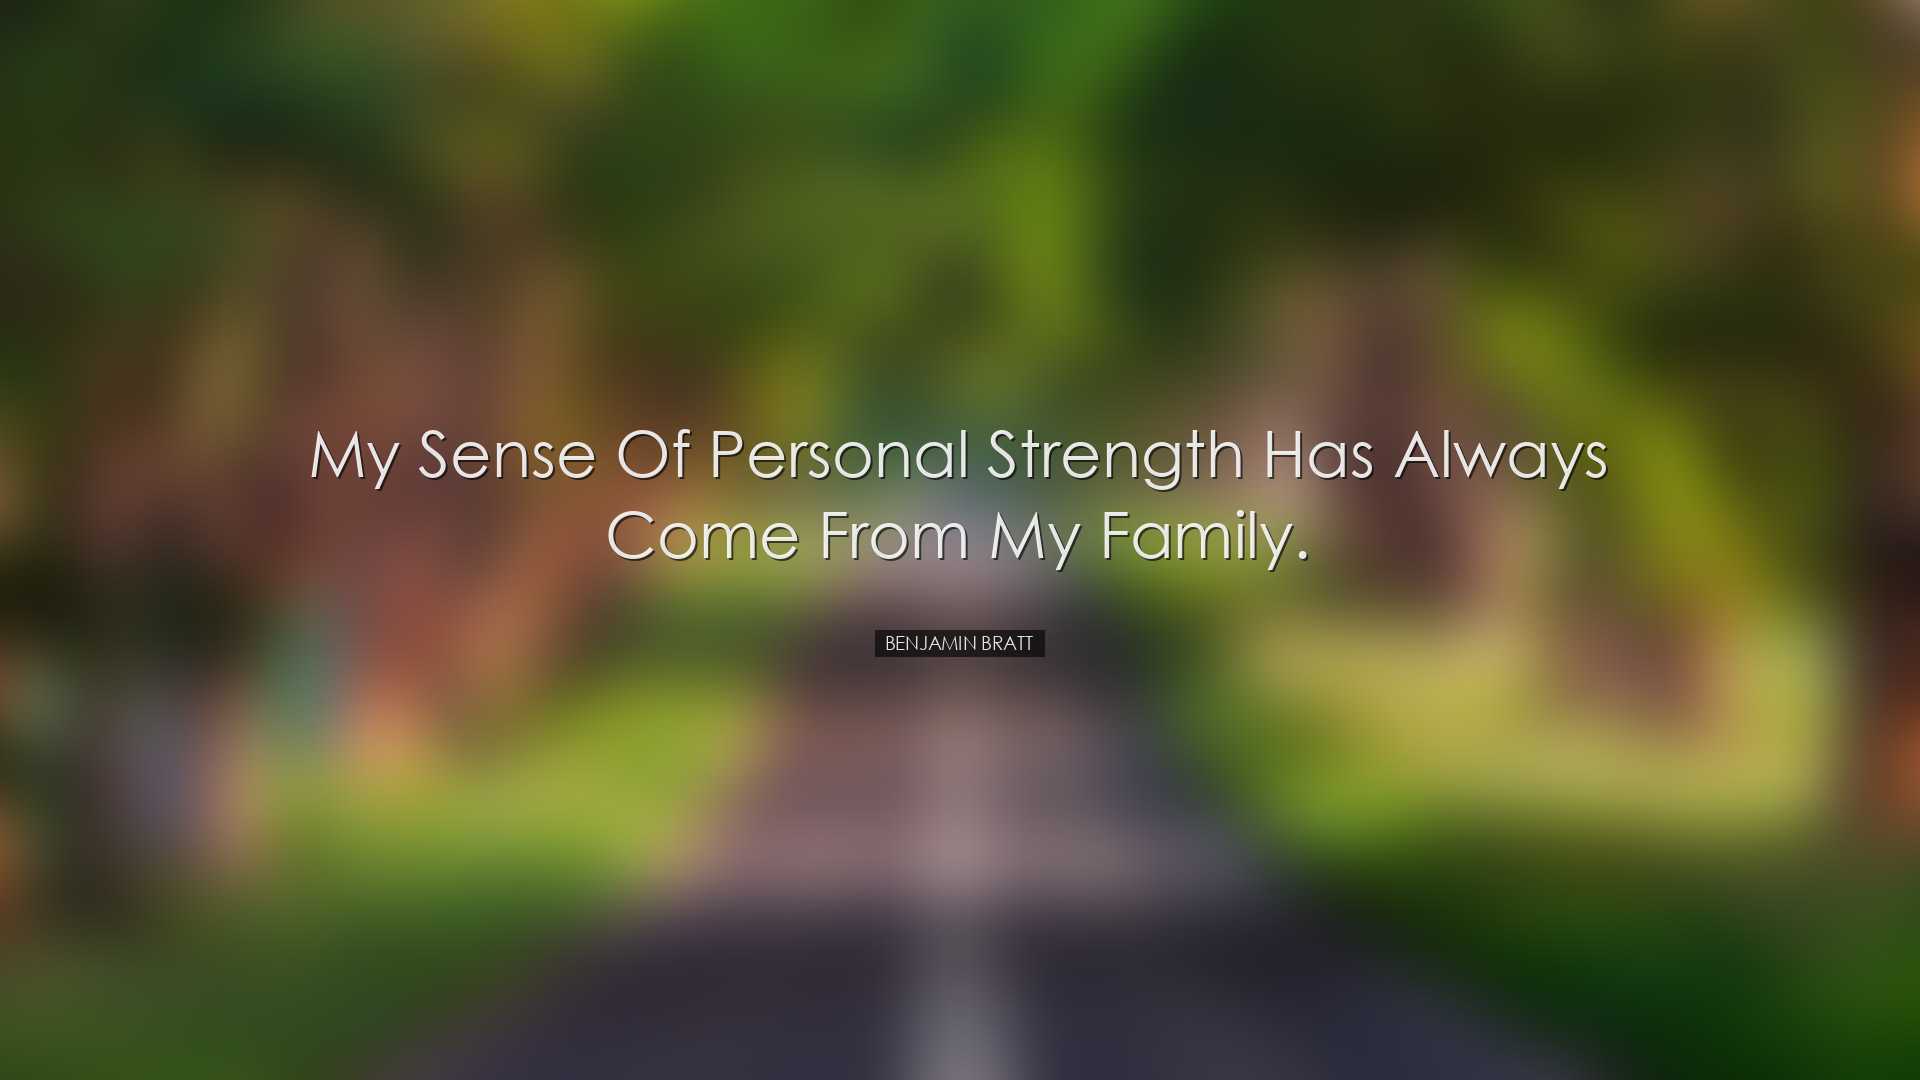 My sense of personal strength has always come from my family. - Be